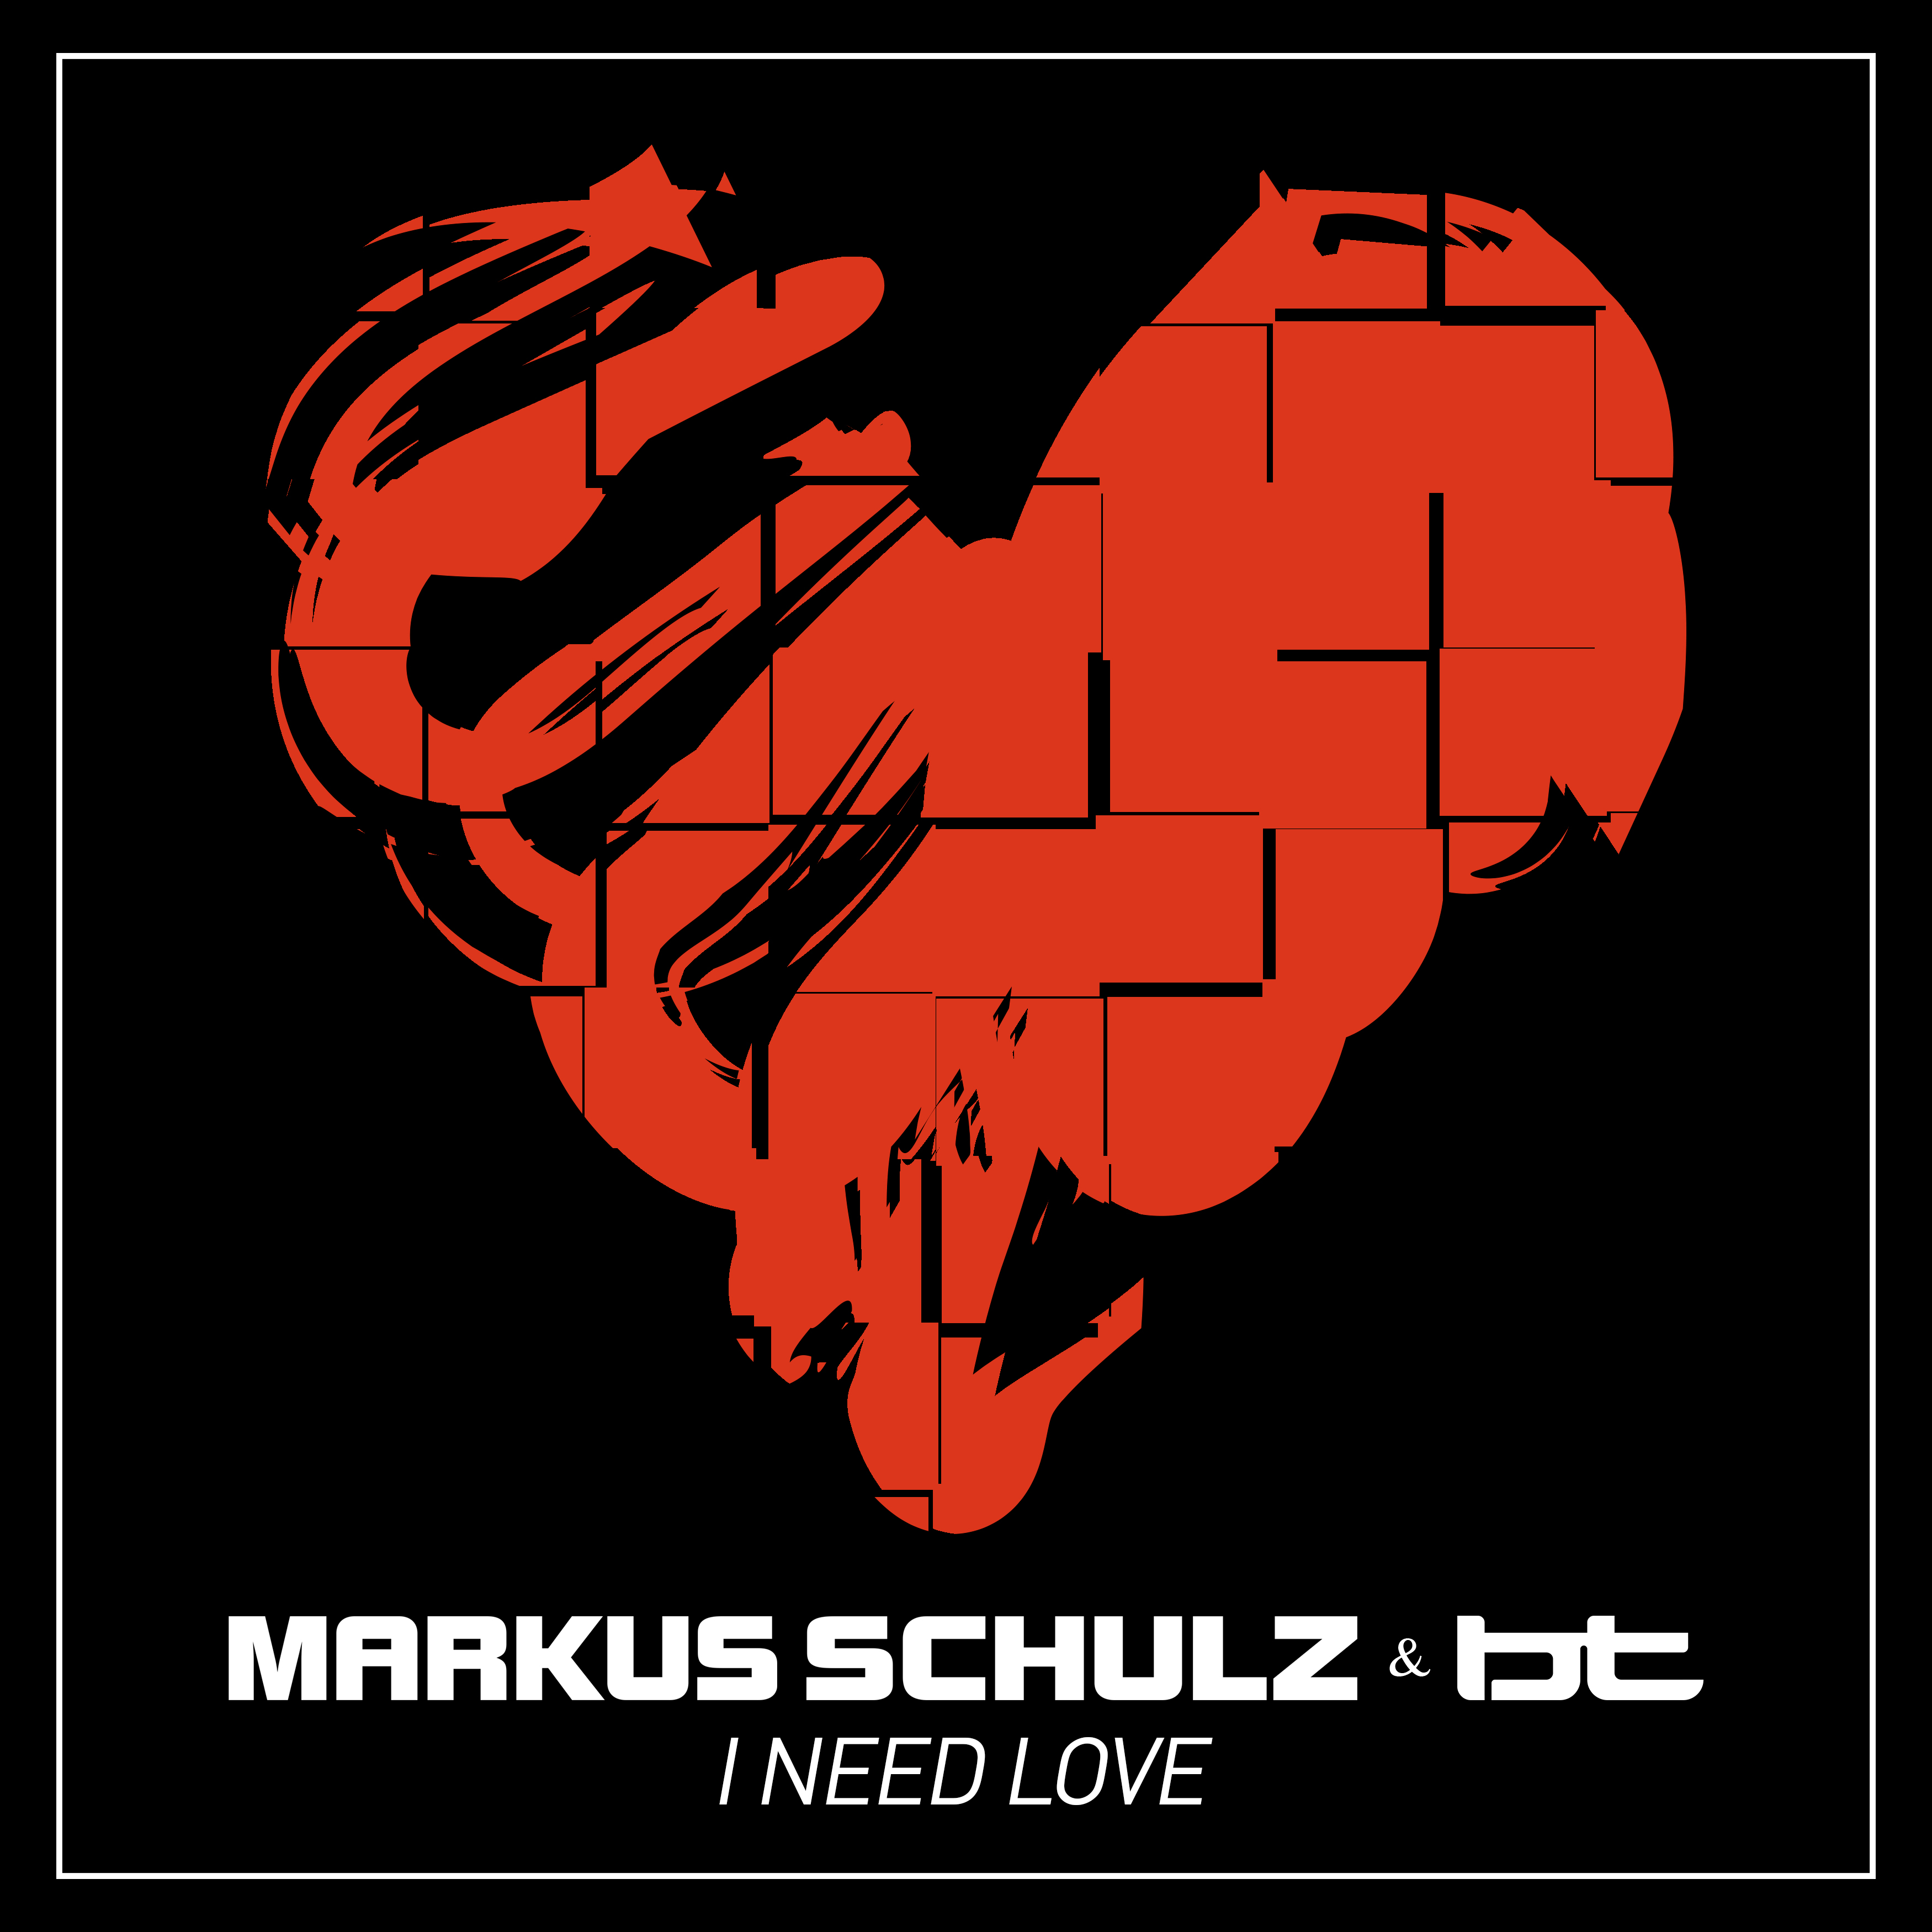 Markus Schulz and BT presents I Need Love on Coldharbour Recordings